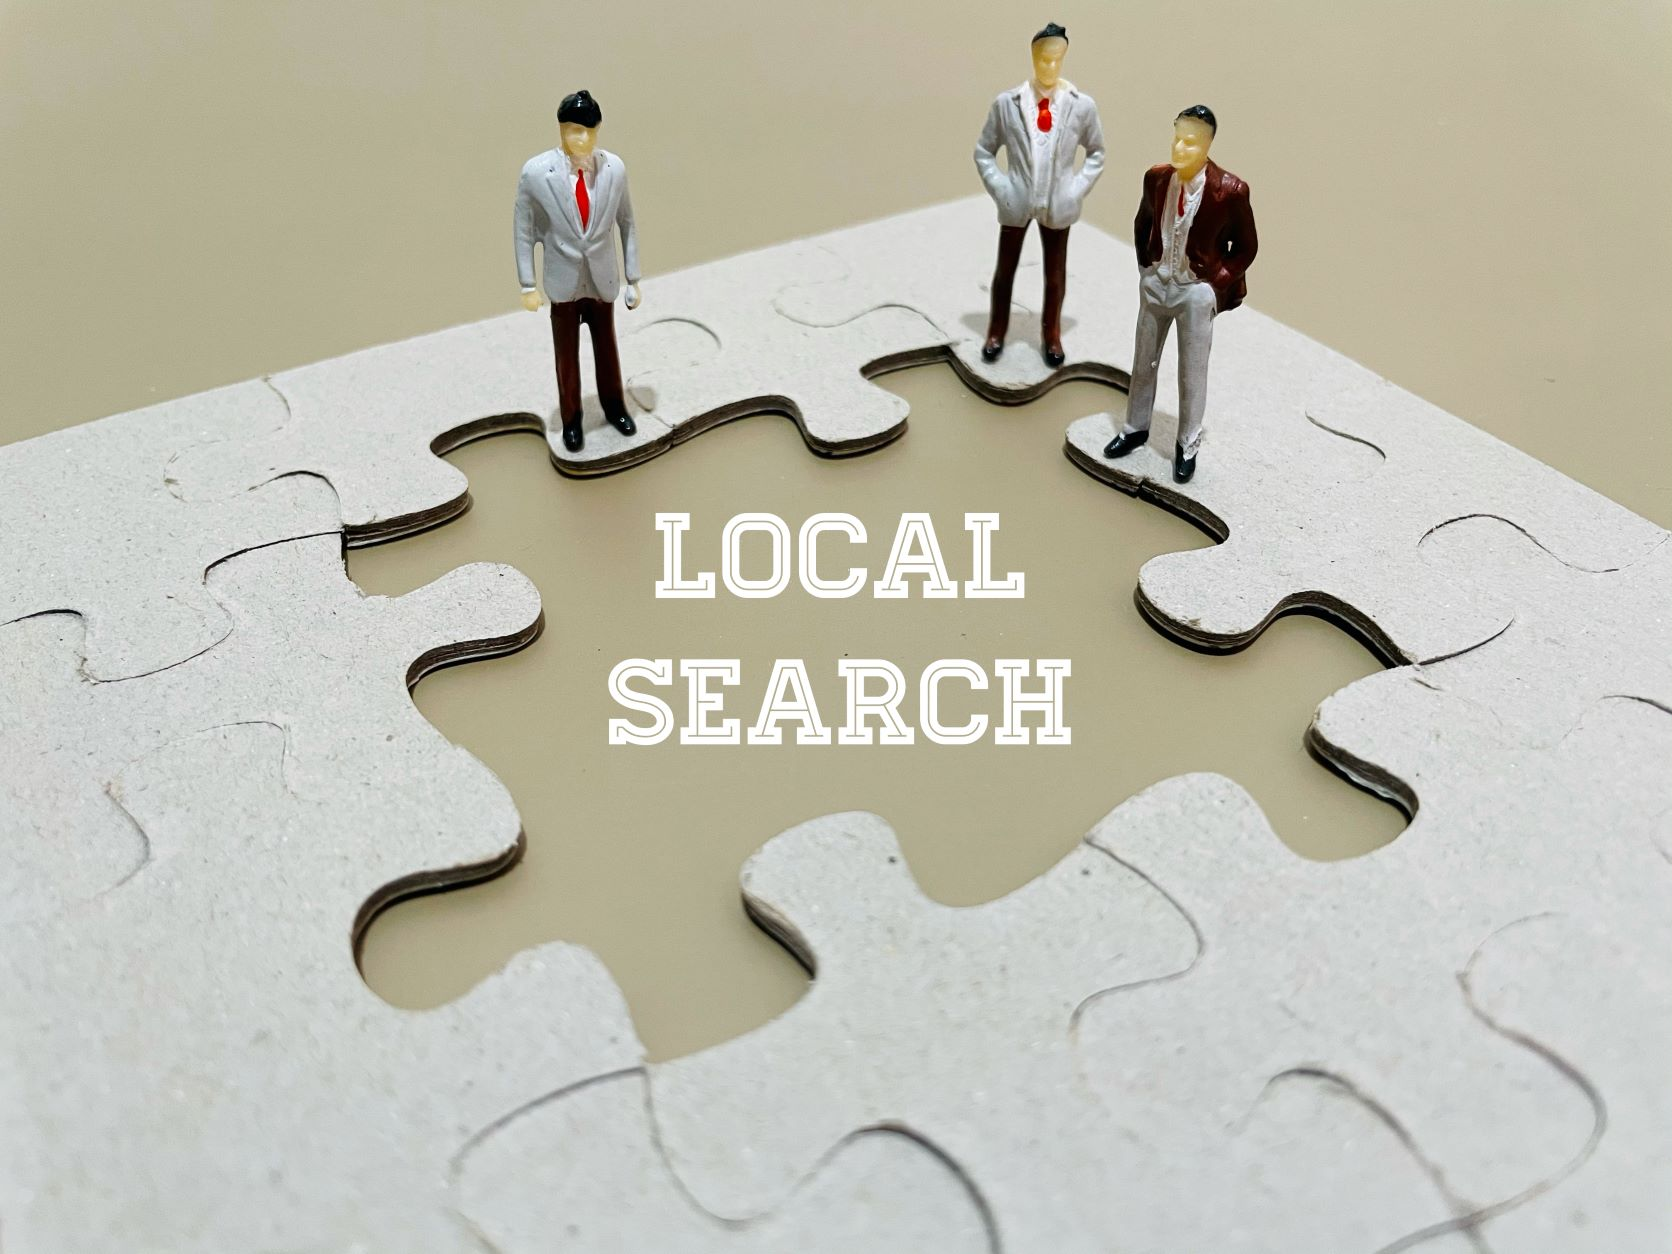 An effective local search program using hyper-localized pages is one of the best dental marketing ideas.